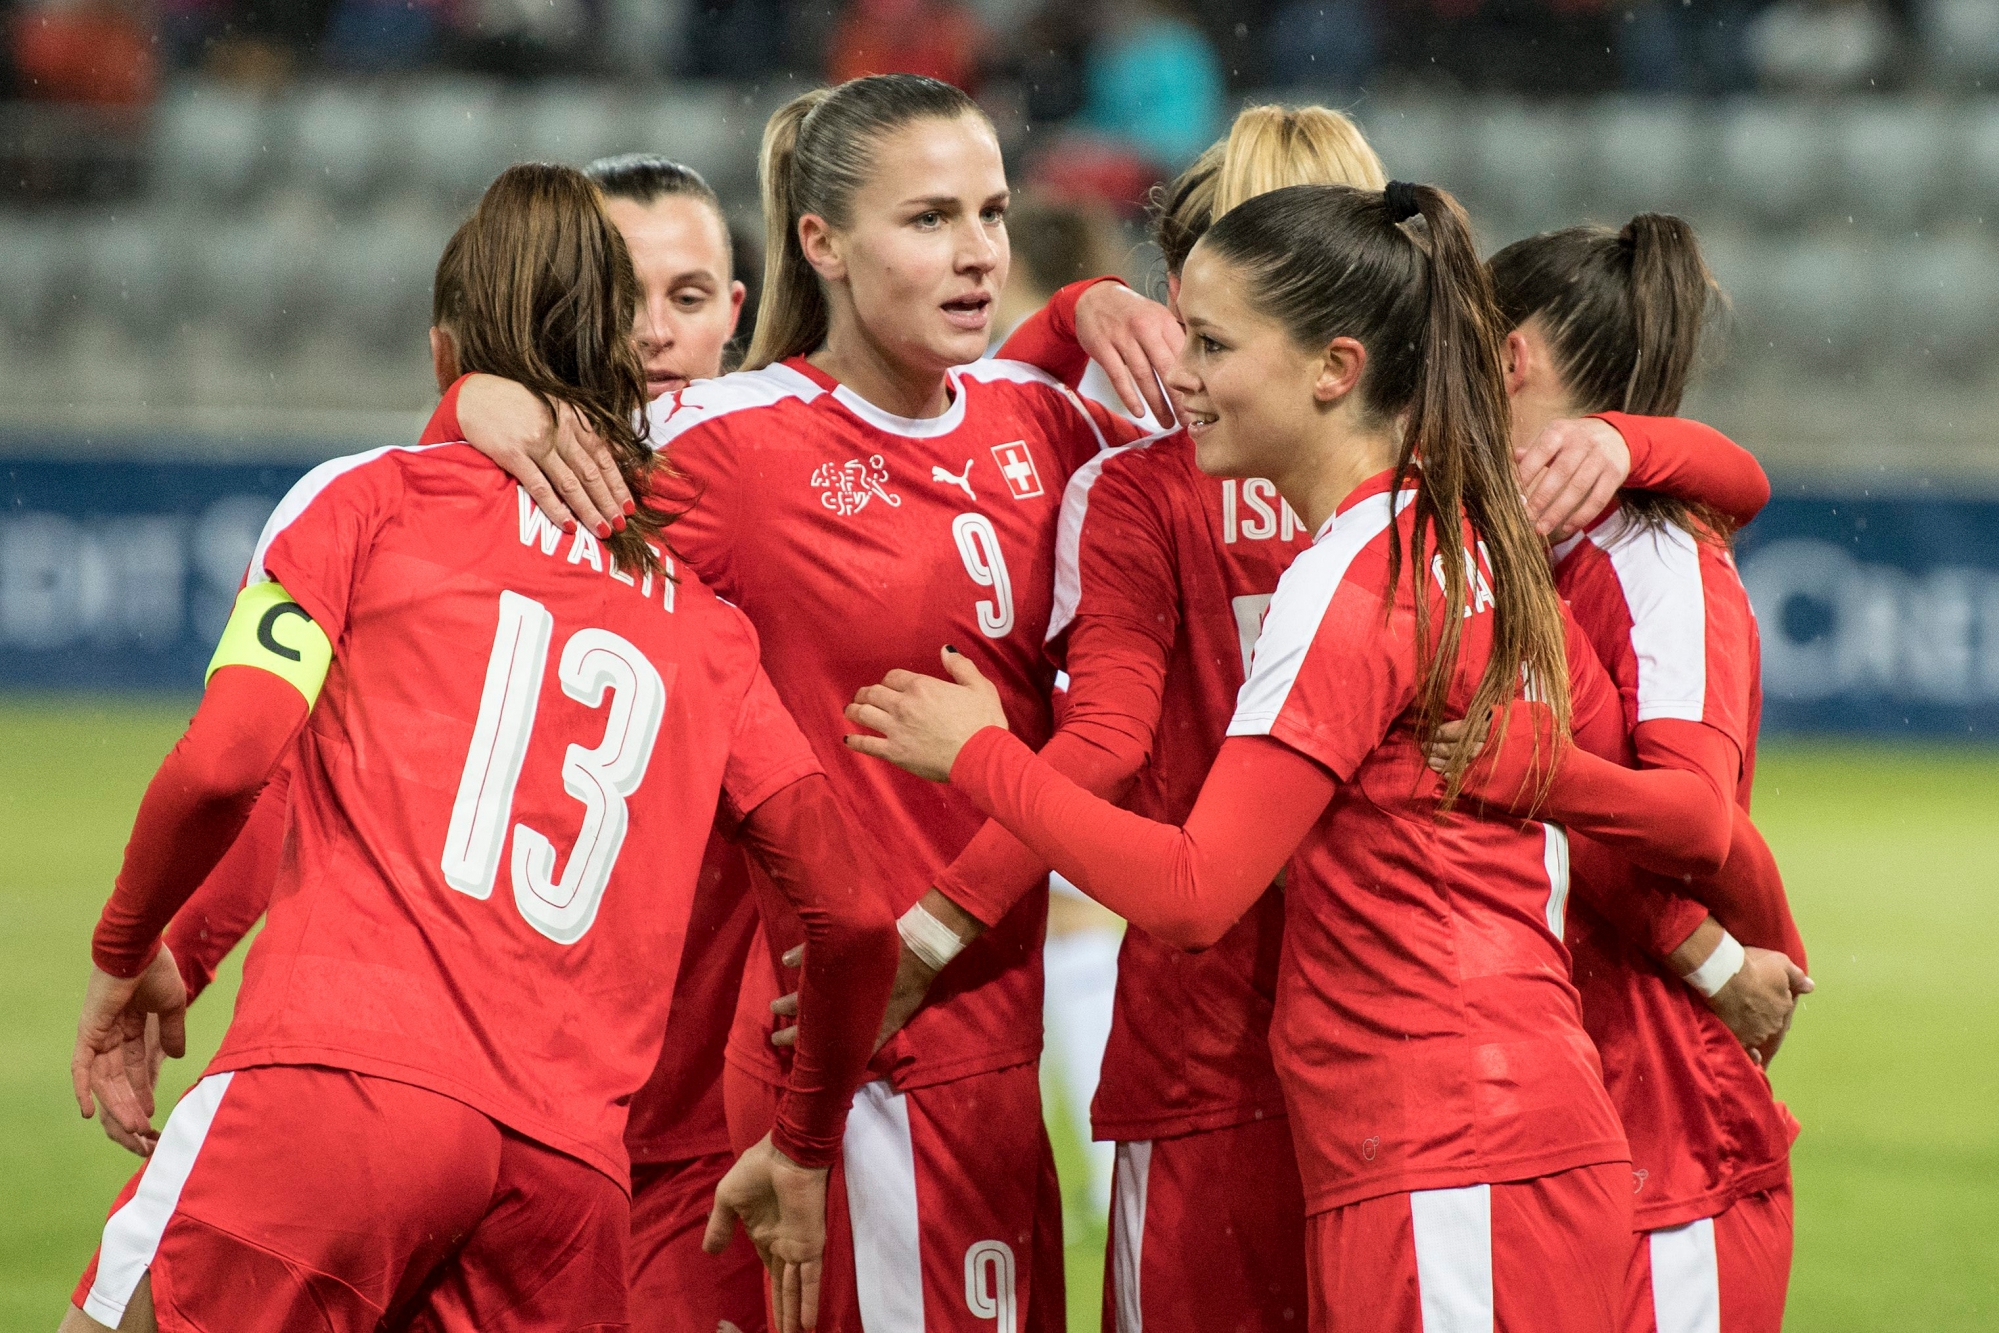 Swiss playsdr celebrate their first goal during the women's World Championship qualifying soccer match between Switzerland and Albania in Biel, Switzerland, Tuesday 28, November 2017.  (KEYSTONE/Peter Schneider) SWITZERLAND SOCCER WOMEN WC QUALIFICATION SWITZERLAND ALBANIA